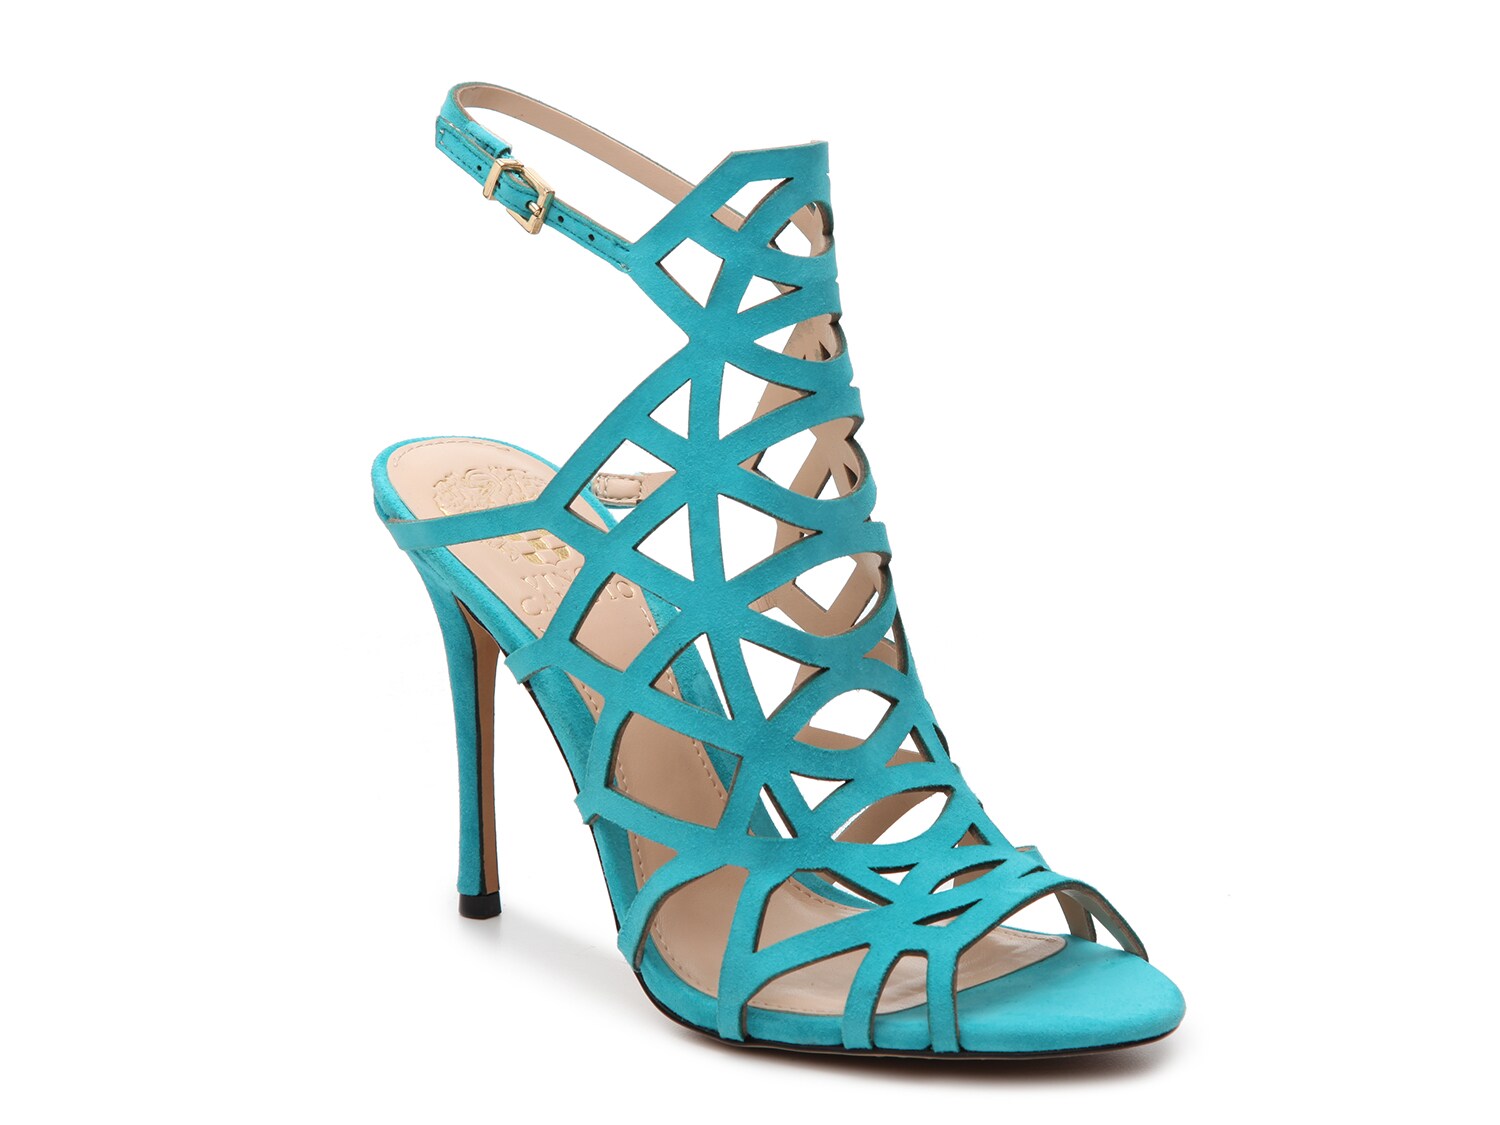 Vince Camuto Kristana Sandal - Free Shipping | DSW